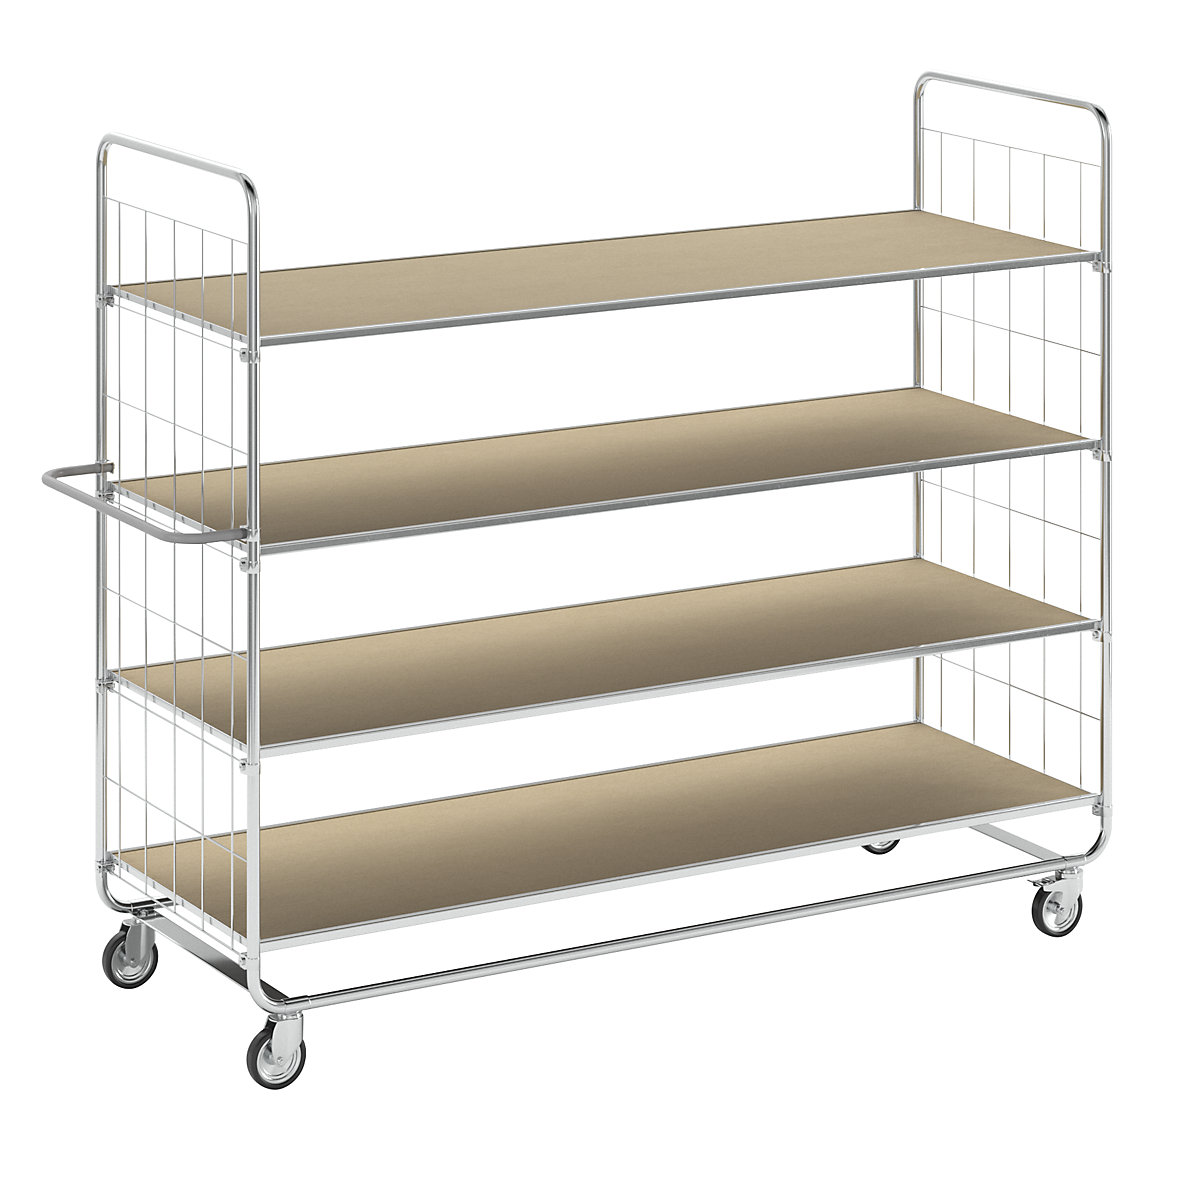 ESD shelf truck, with 4 shelves – Kongamek, 4 castors, 2 with stops, LxWxH 1395 x 470 x 1120 mm, 2+ items-16